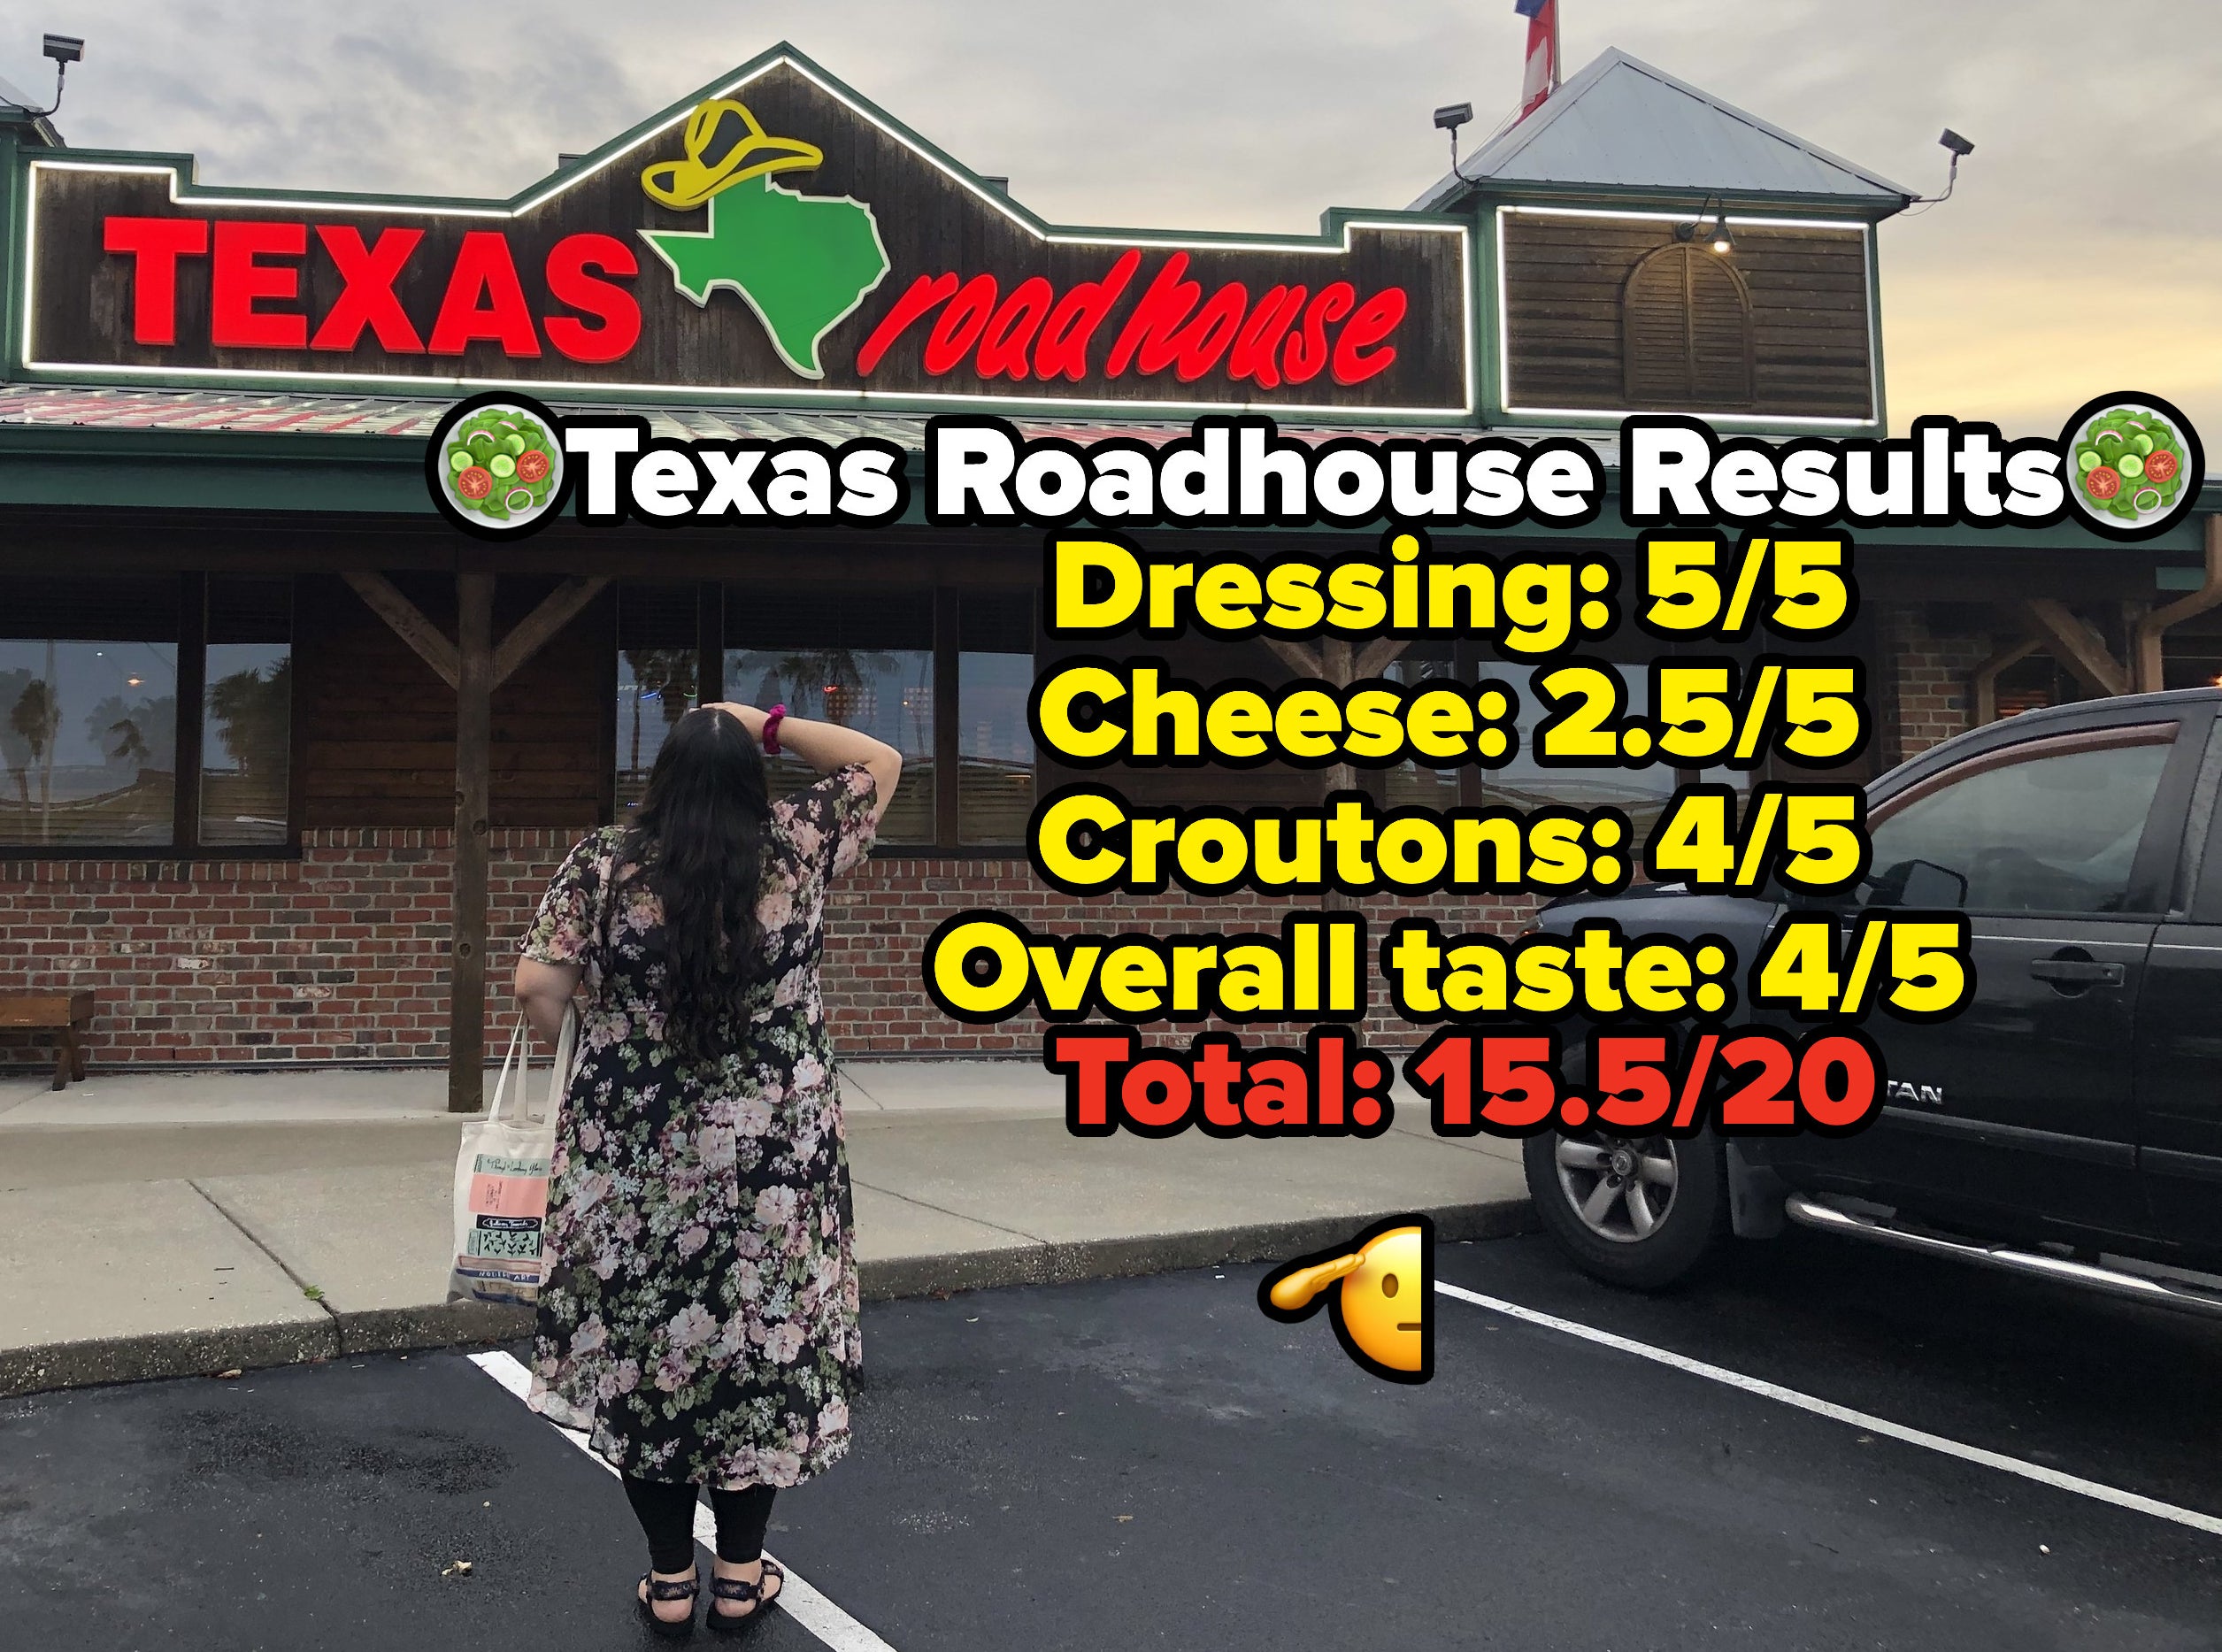 Photo of Texas roadhouse with text that says &quot;Texas Roadhouse Results: dressing 5/5, cheese 2.5/5, croutons 4/5, overall taste 4/5, total 15.5/20&quot;